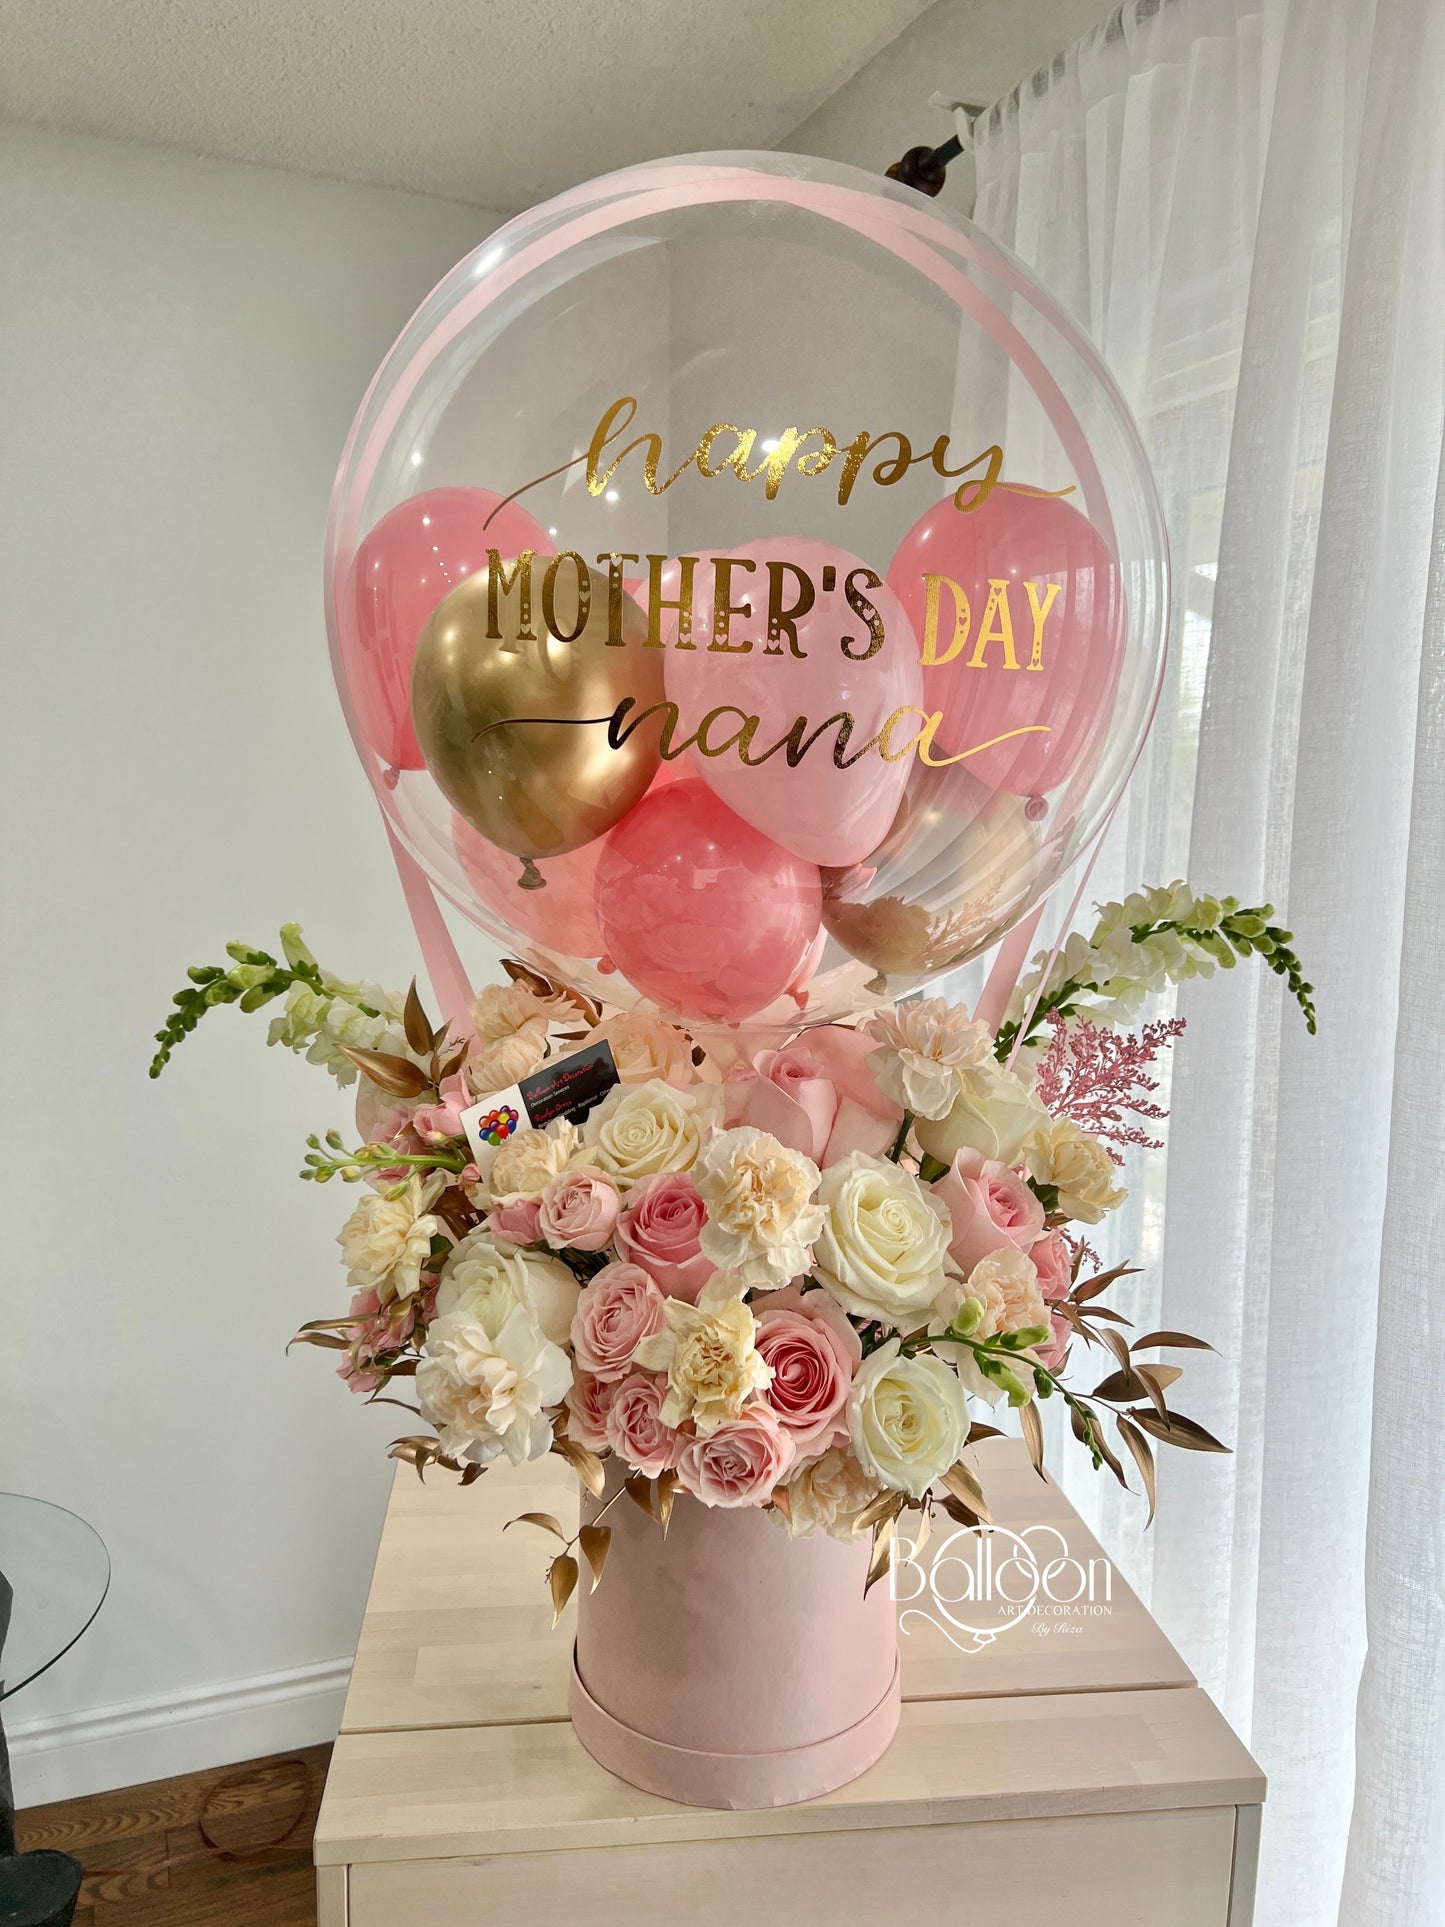 Mother's Day Gift - Hot Air Balloon